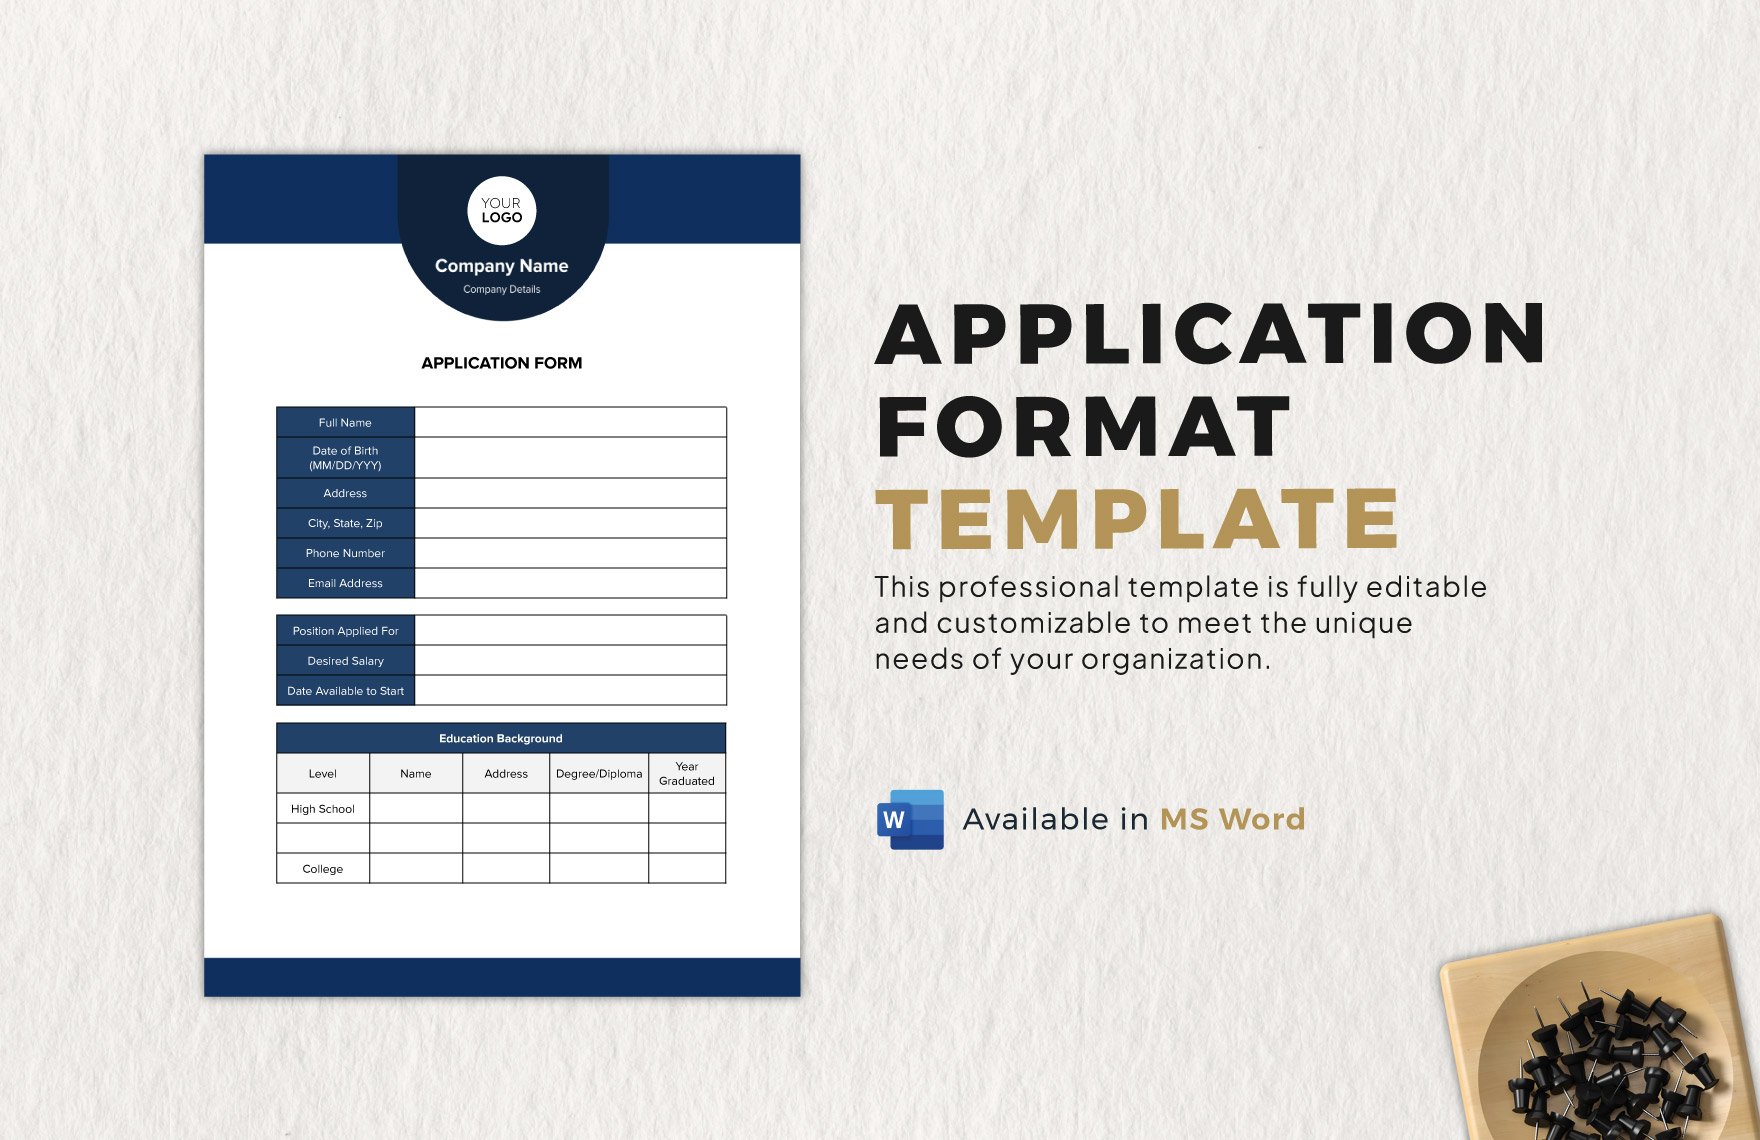 Application Format Template